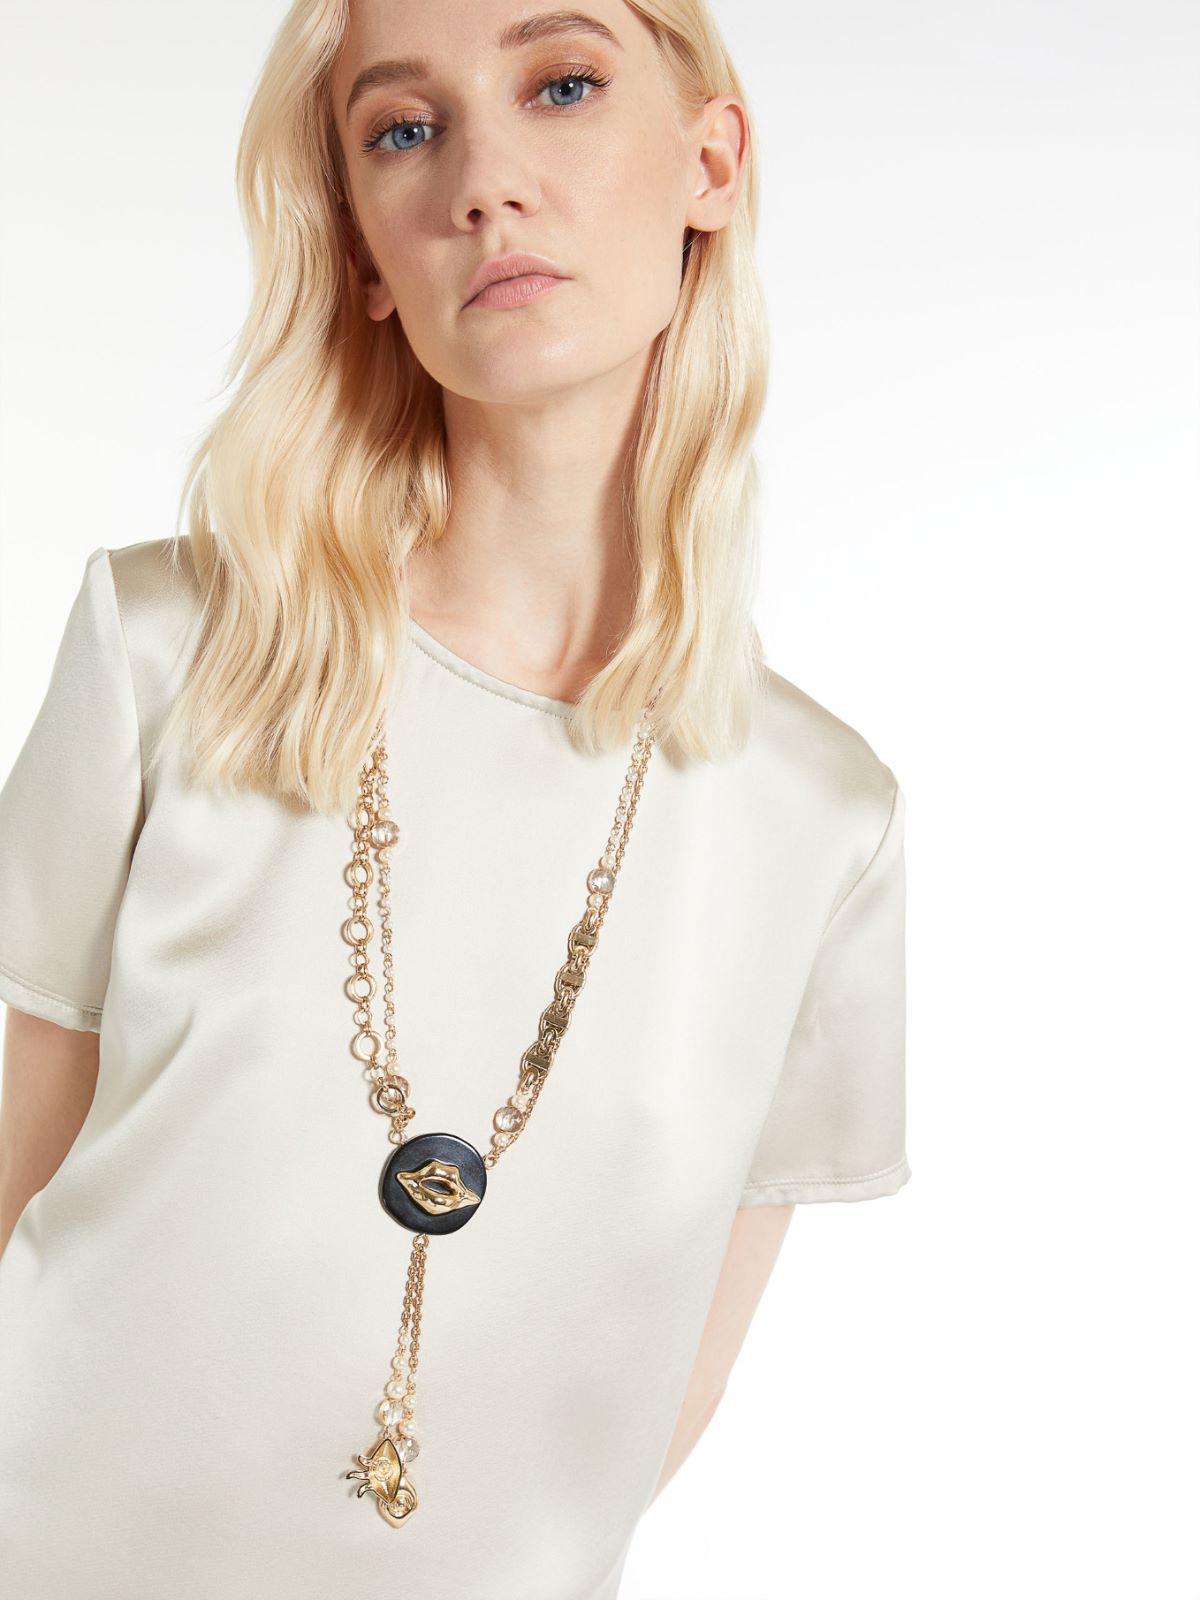 Pendant-adorned metal necklace - GOLD - Weekend Max Mara - 3